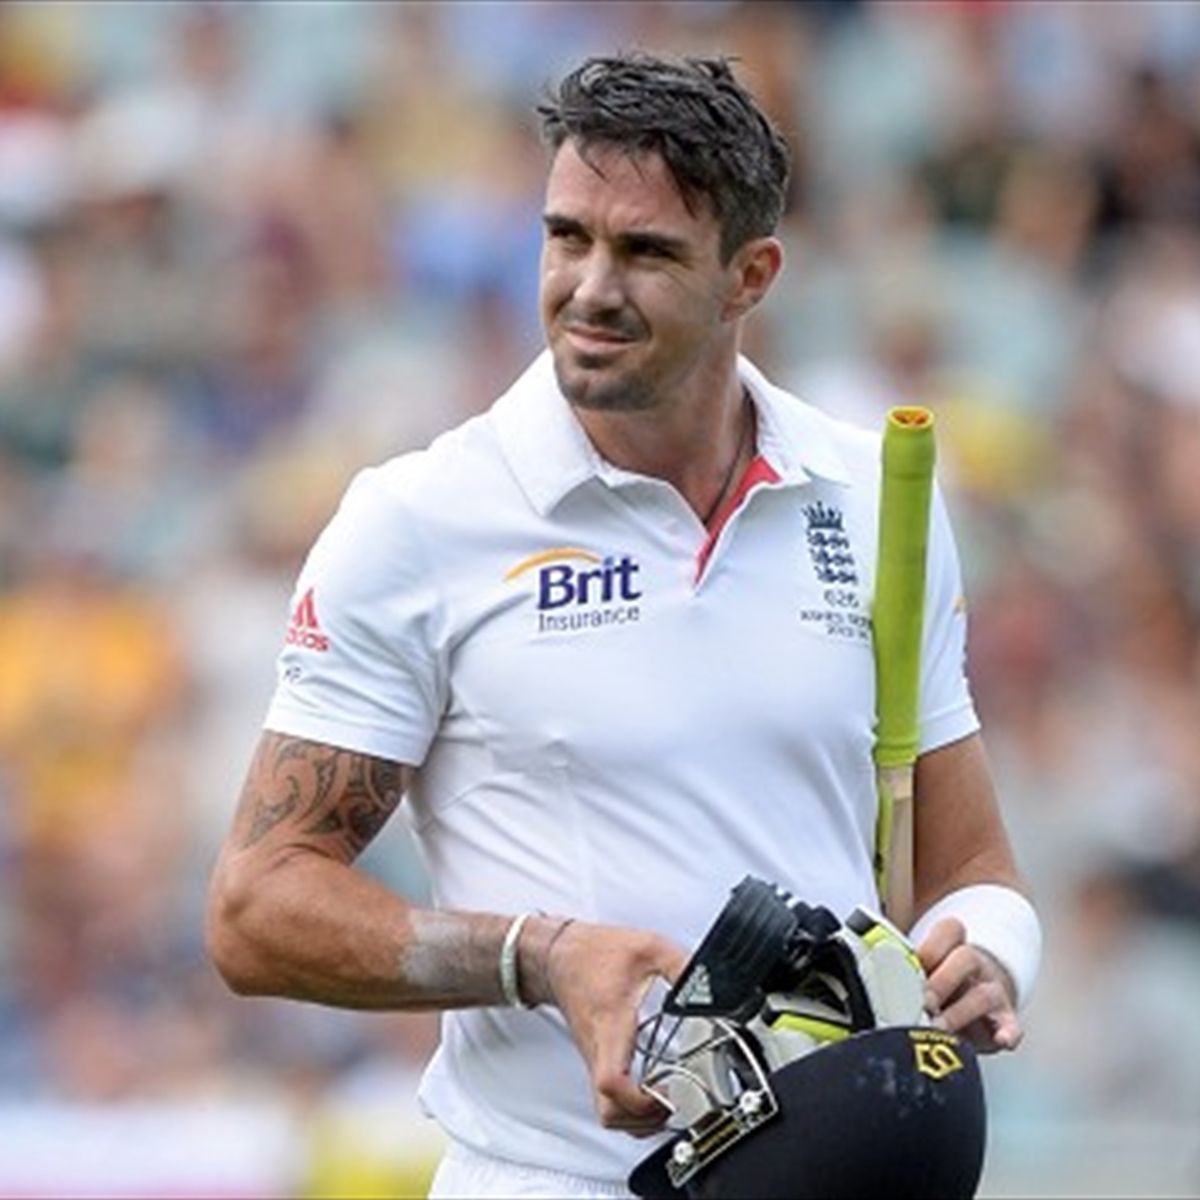 Kevin Pietersen shows his tattoo 186 is his ODI player number and News  Photo  Getty Images